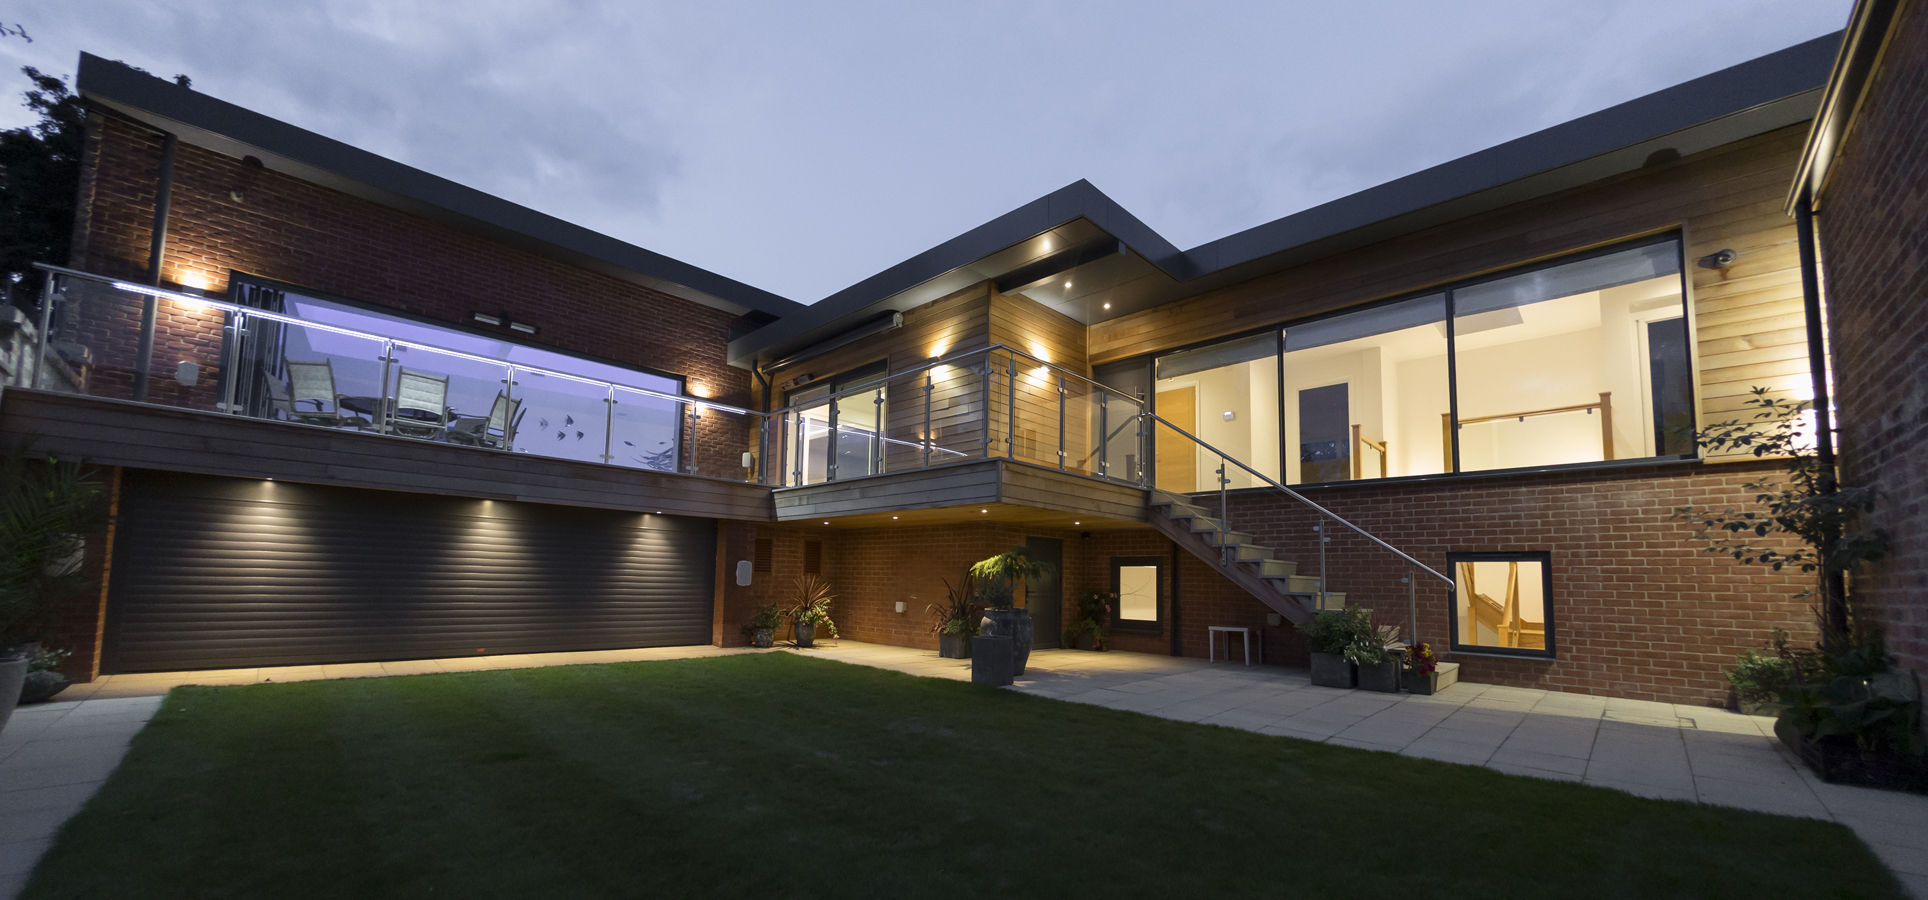 Residential Home, Lincoln, Jessops Construction Ltd